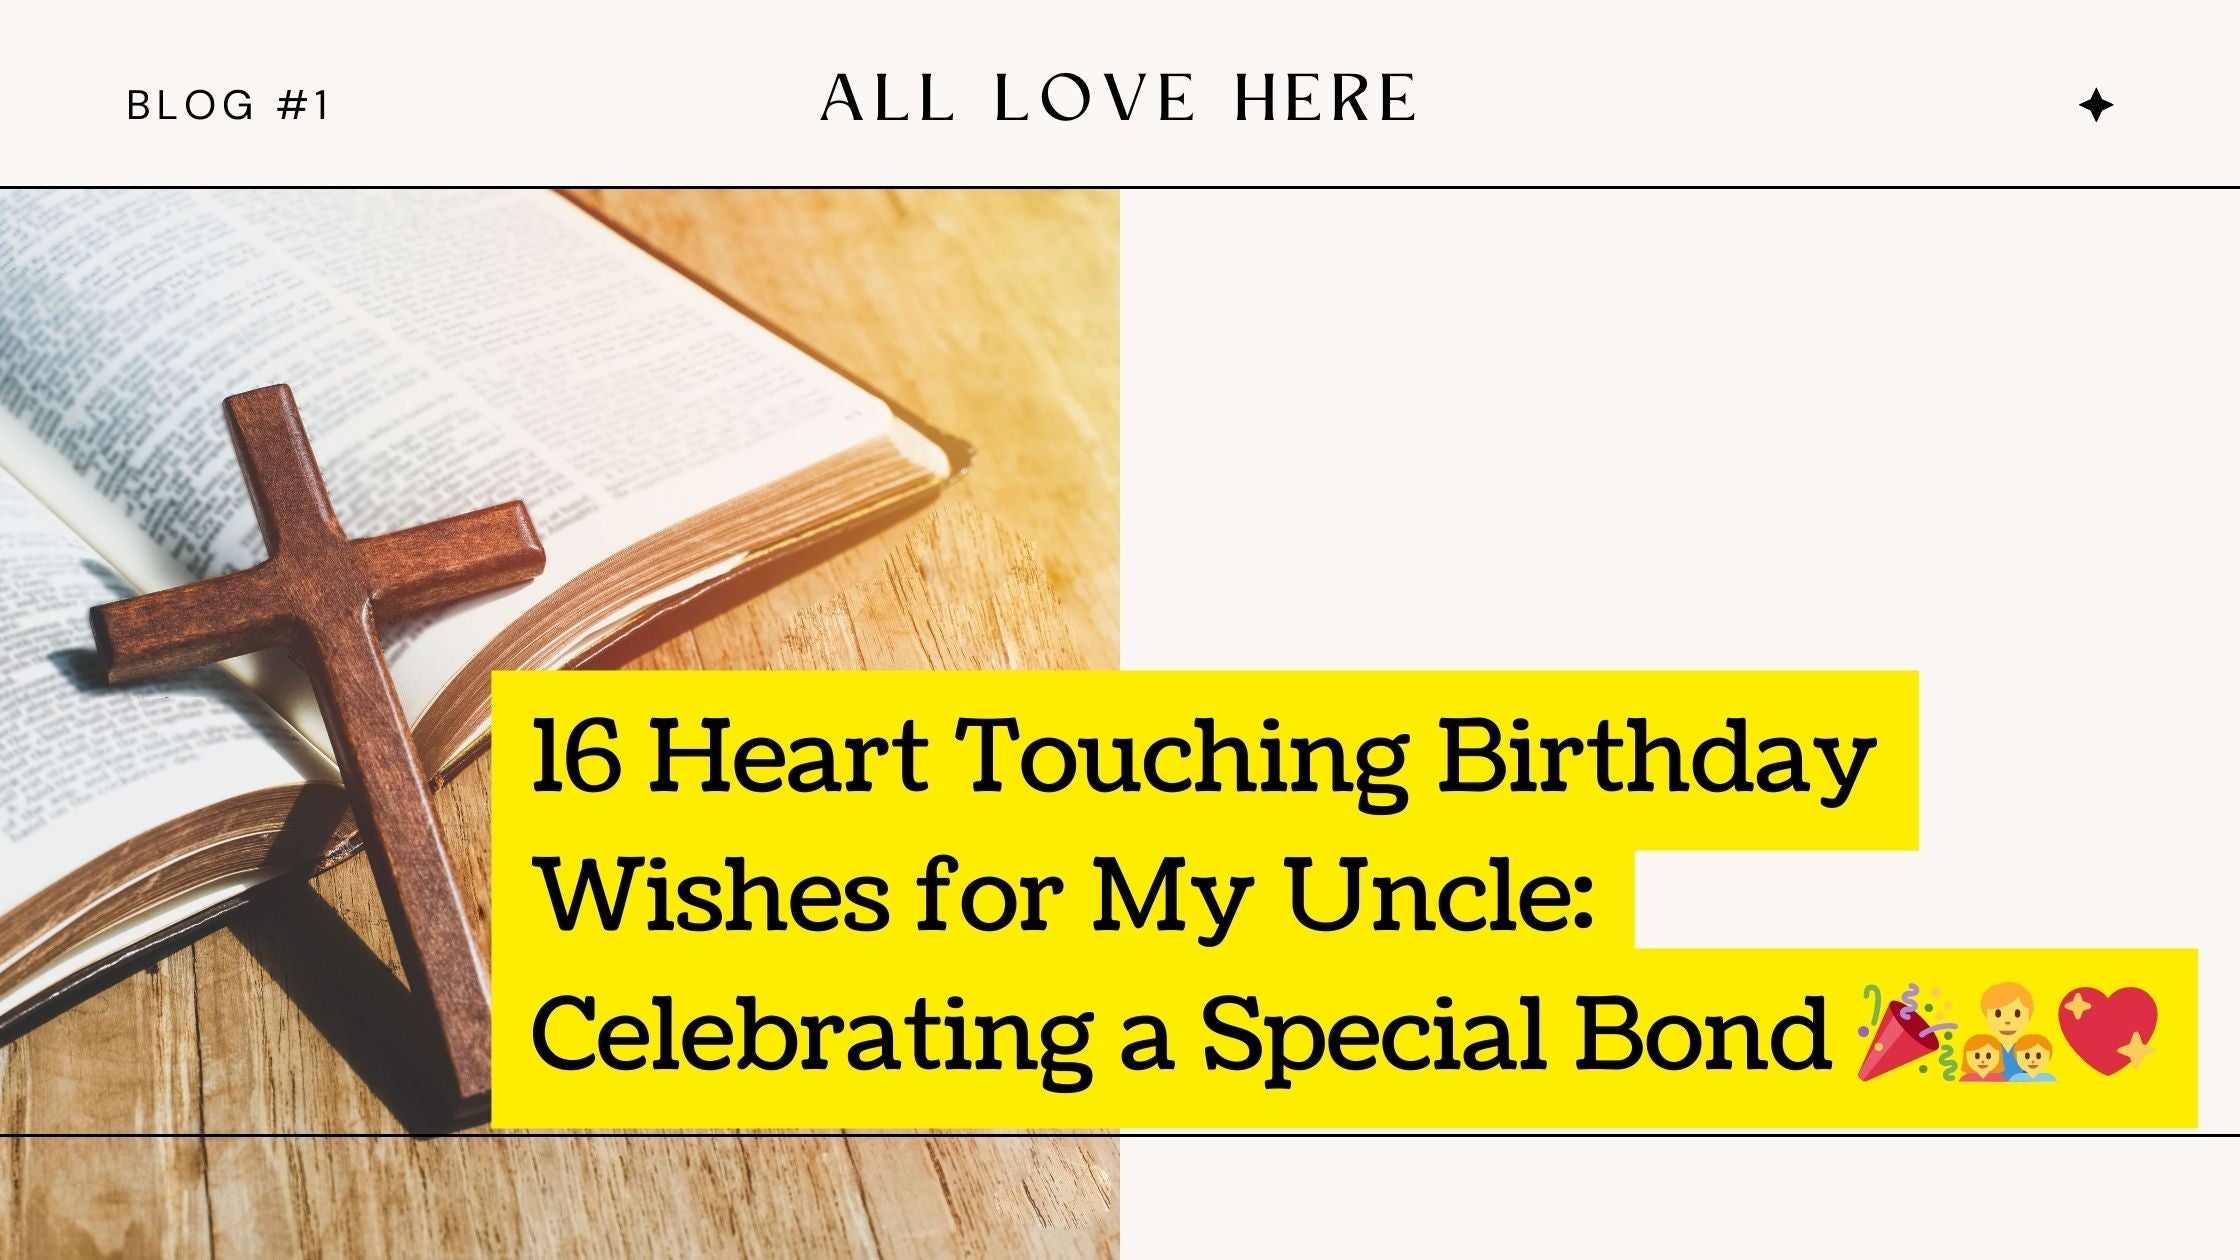 16 Heart Touching Birthday Wishes for My Uncle: Celebrating a Special Bond 🎉👨‍👧‍👦💖